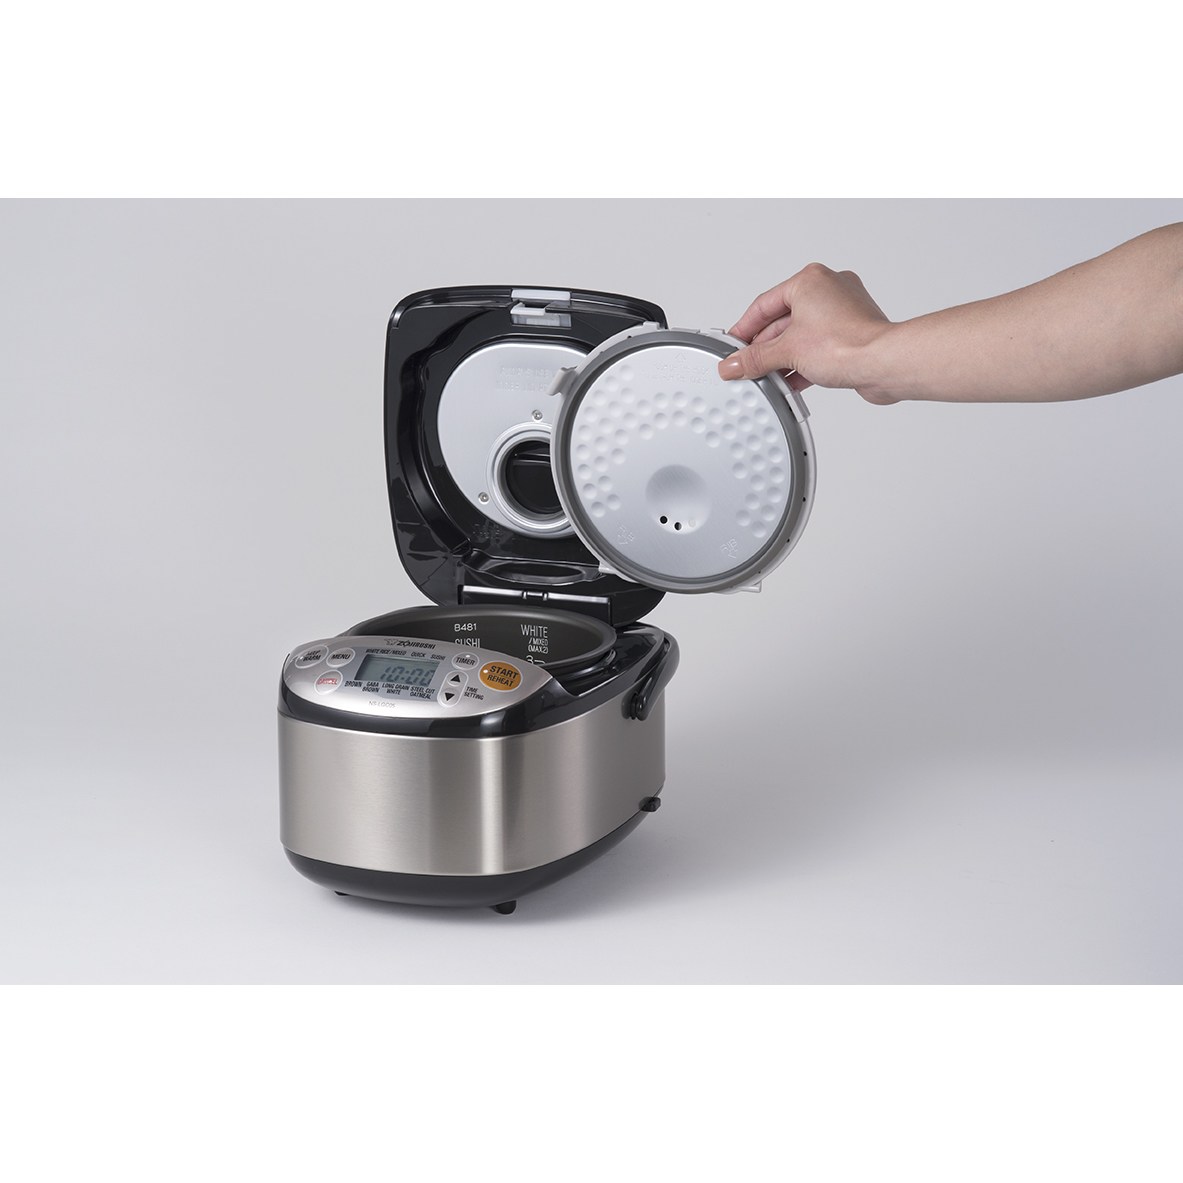 Zojirushi NS-LGC05XB Micom Rice Cooker & Warmer, 3 Cup (Uncooked), Stainless Black - image 2 of 11